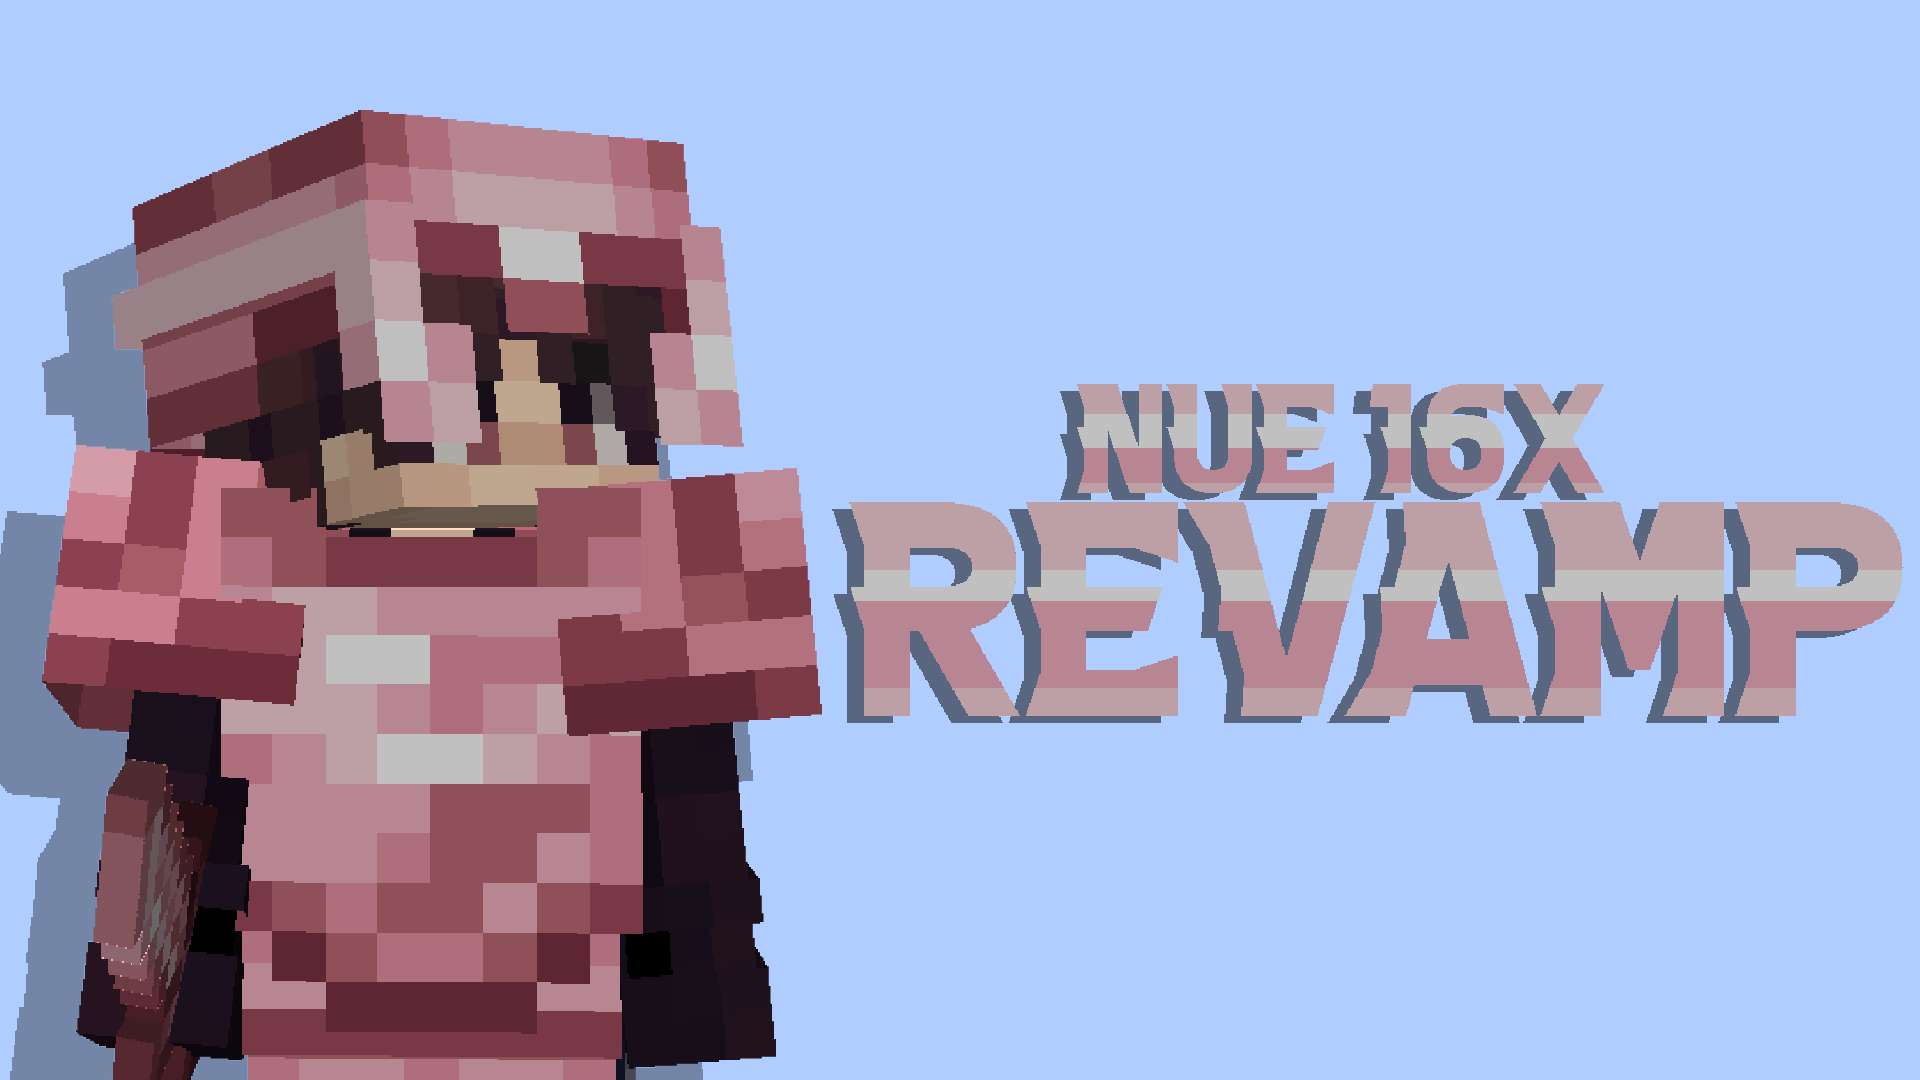 Nue revamp 16 by jaxxthatsall on PvPRP